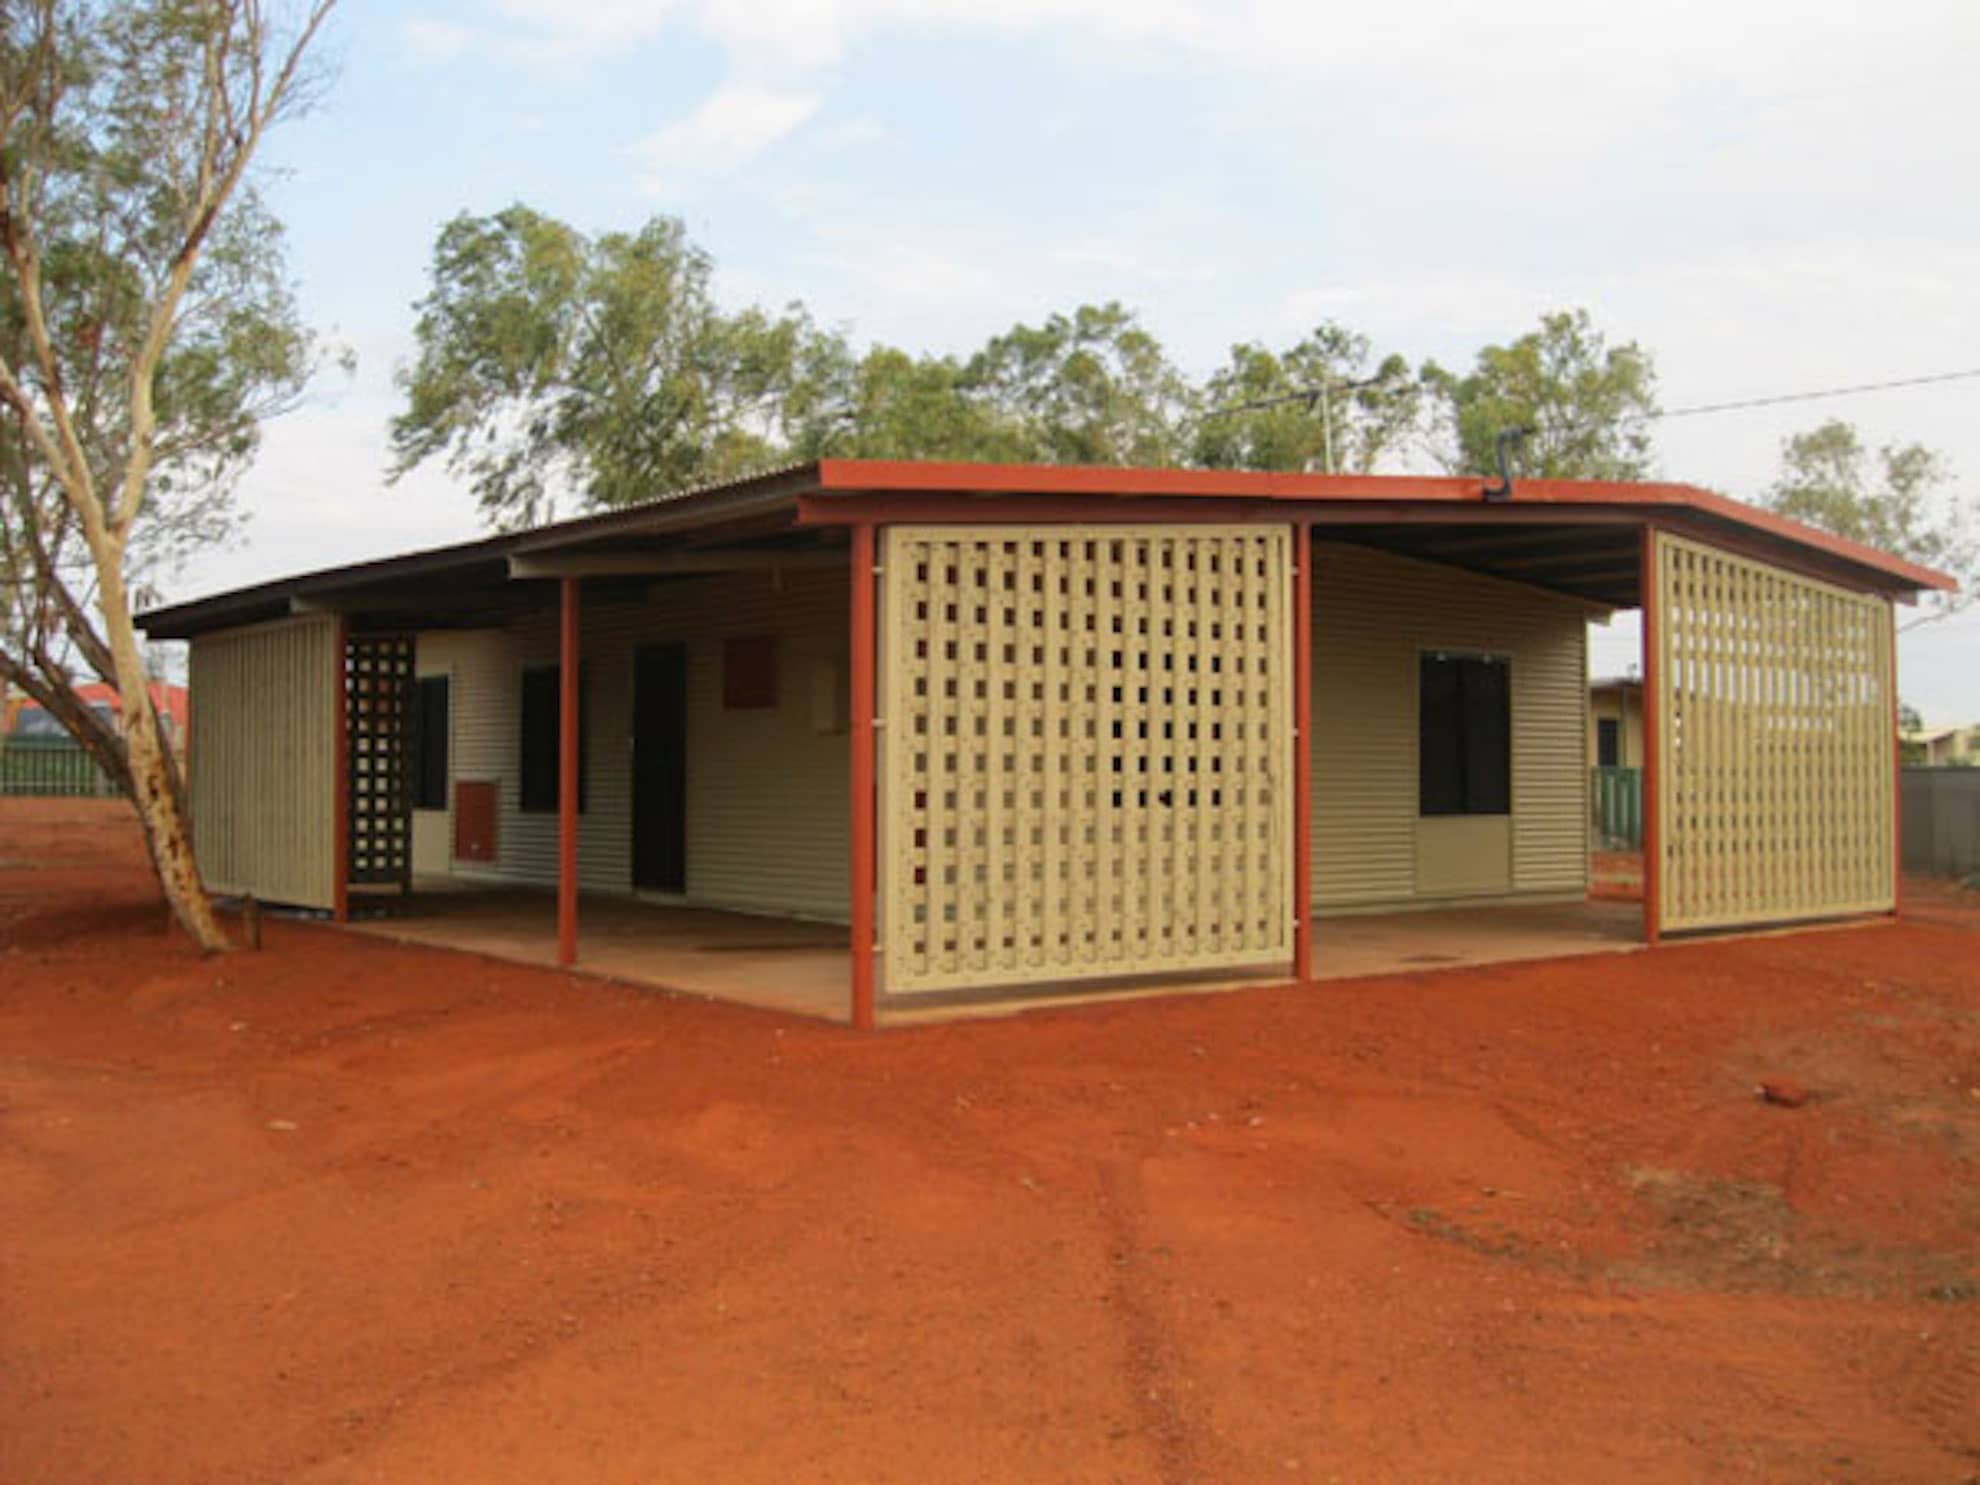 Indigenous project by mdesign, a building design practice that operates on the Sunshine Coast.